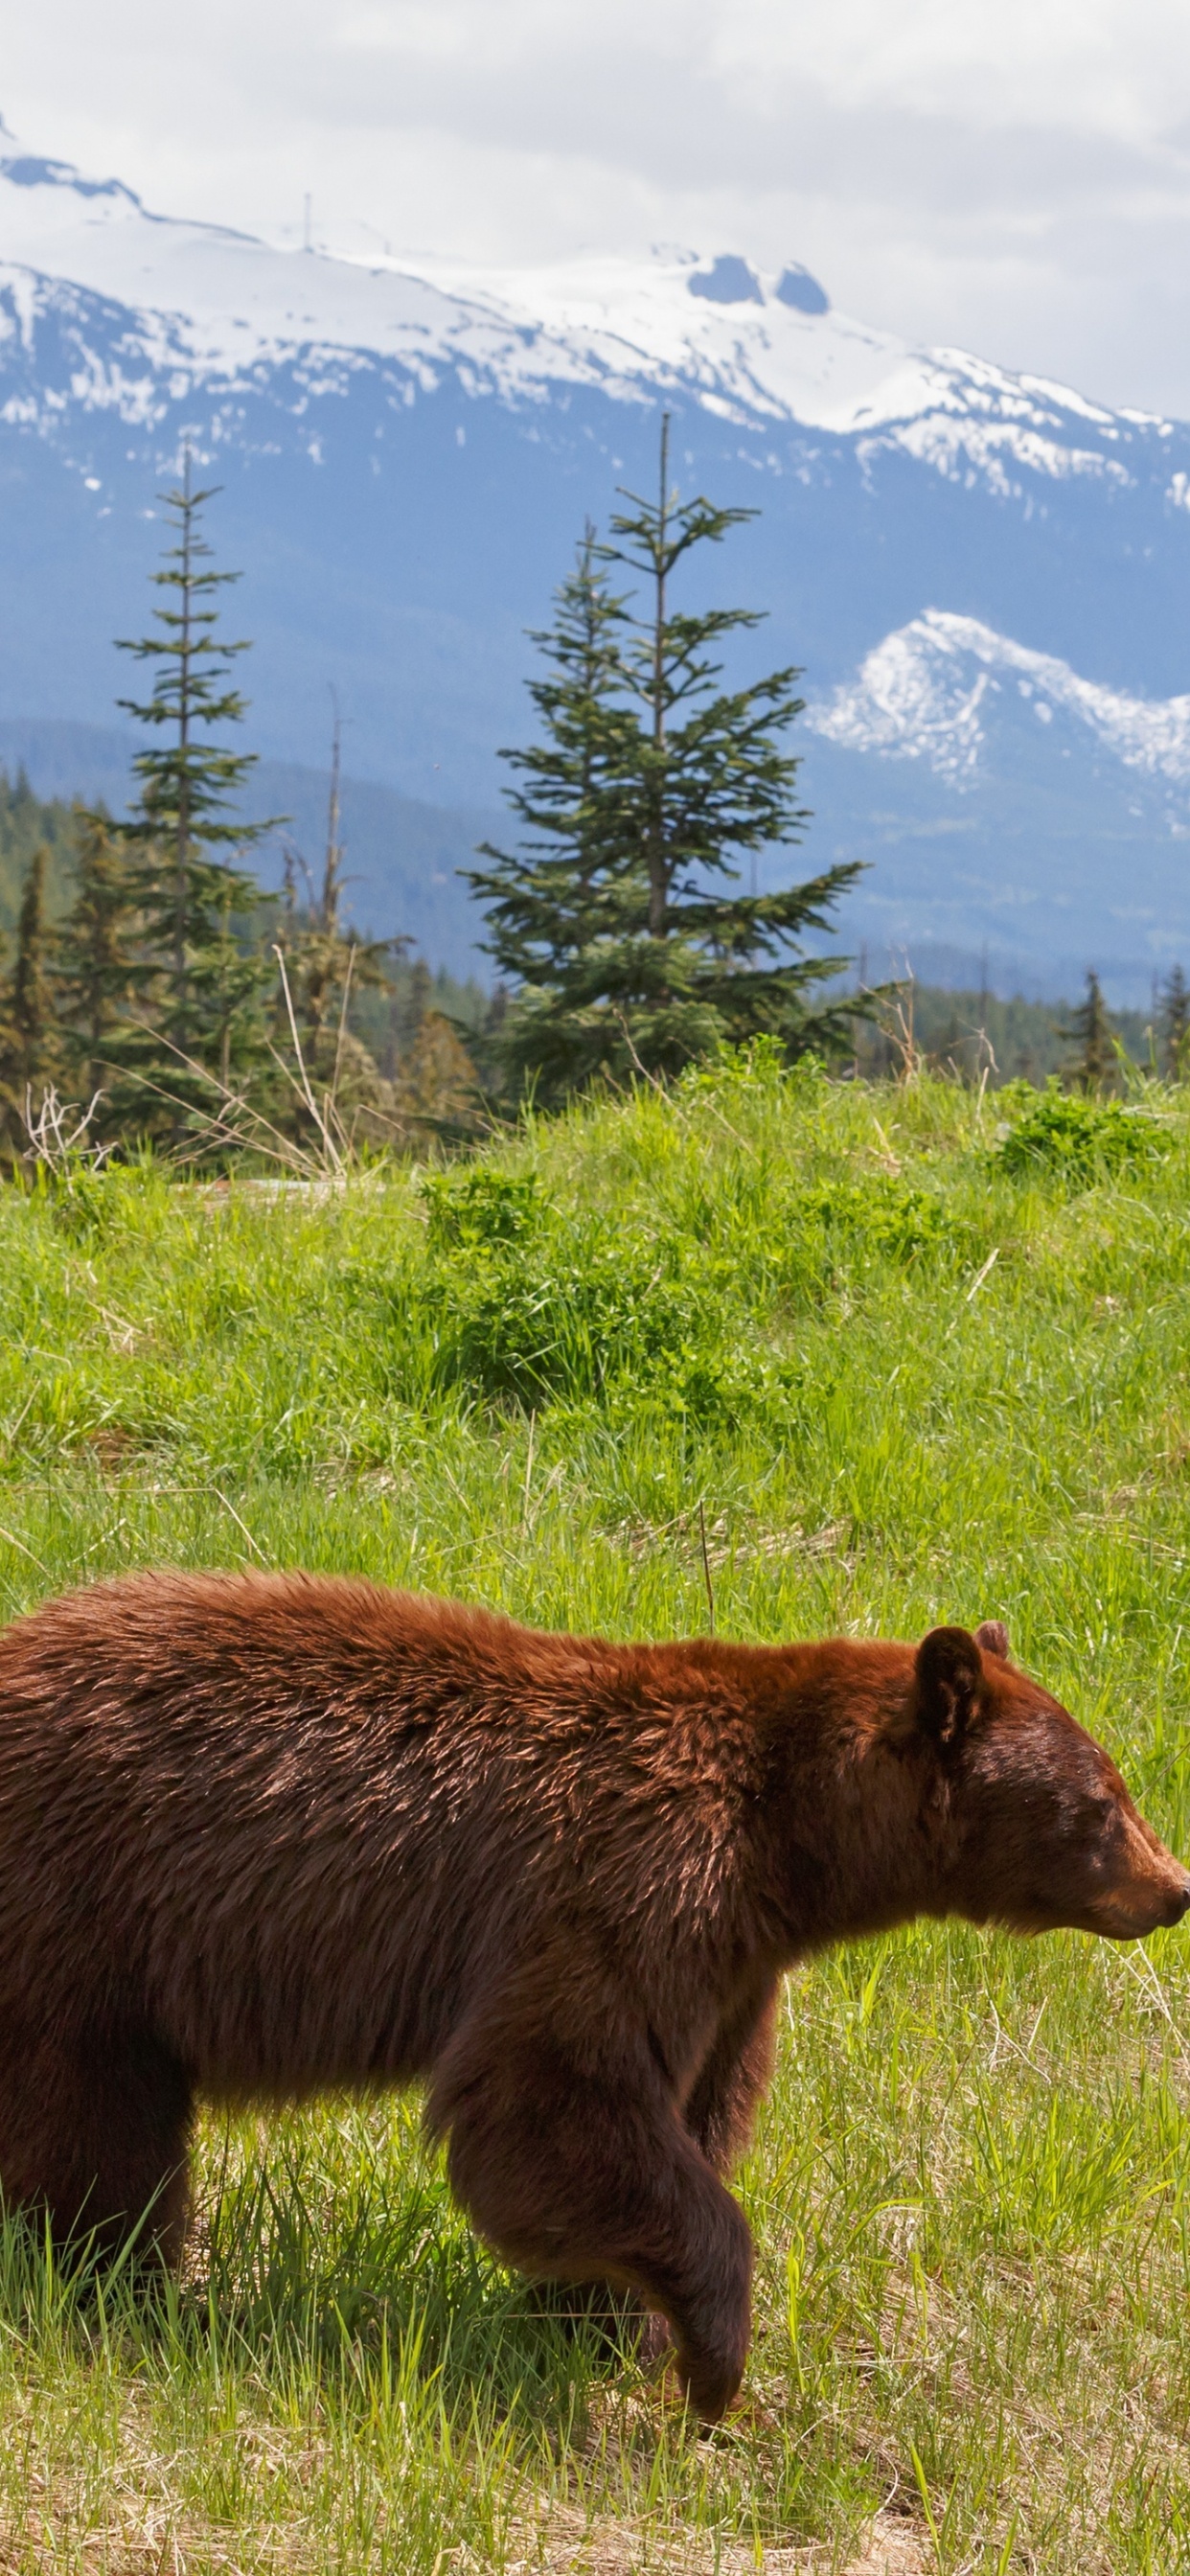 Brown Bear on Green Grass Field During Daytime. Wallpaper in 1242x2688 Resolution